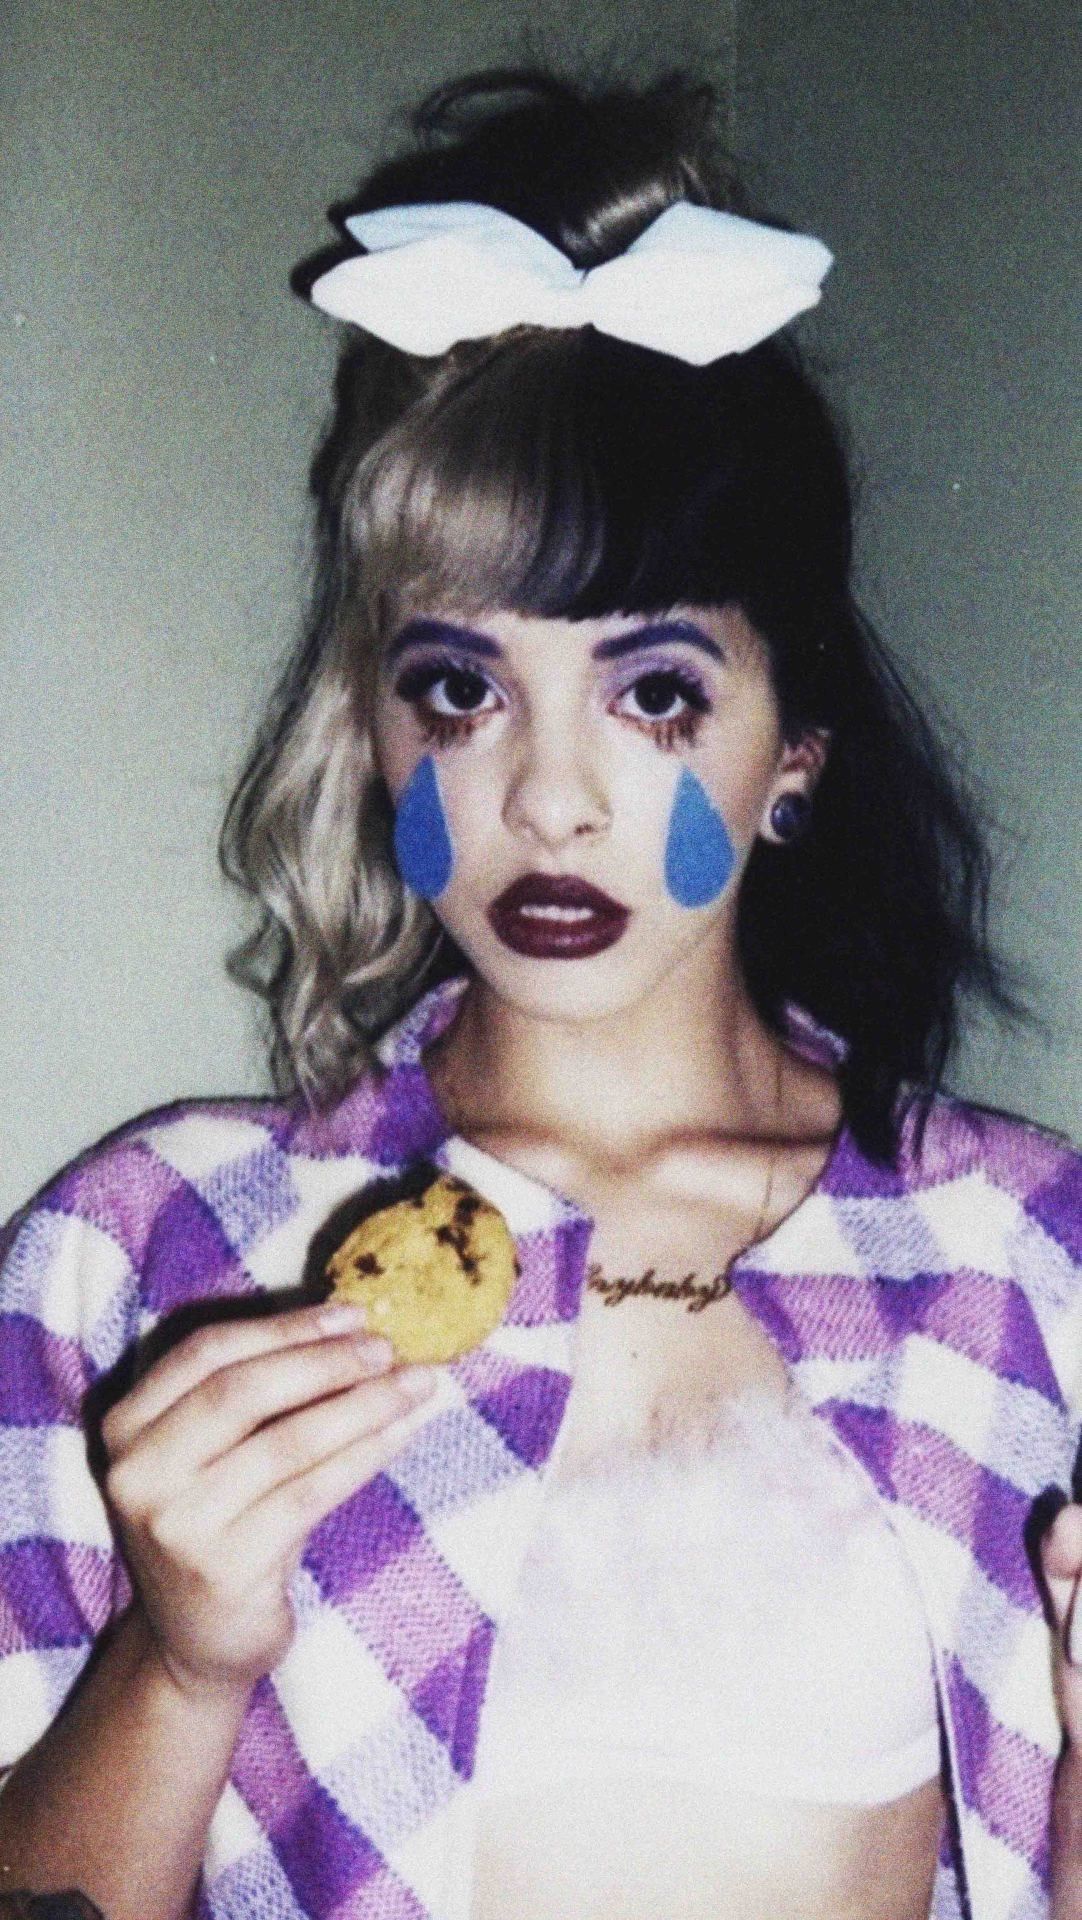 A girl with a bow in her hair and makeup that makes her look like she's crying while eating a cookie - Melanie Martinez